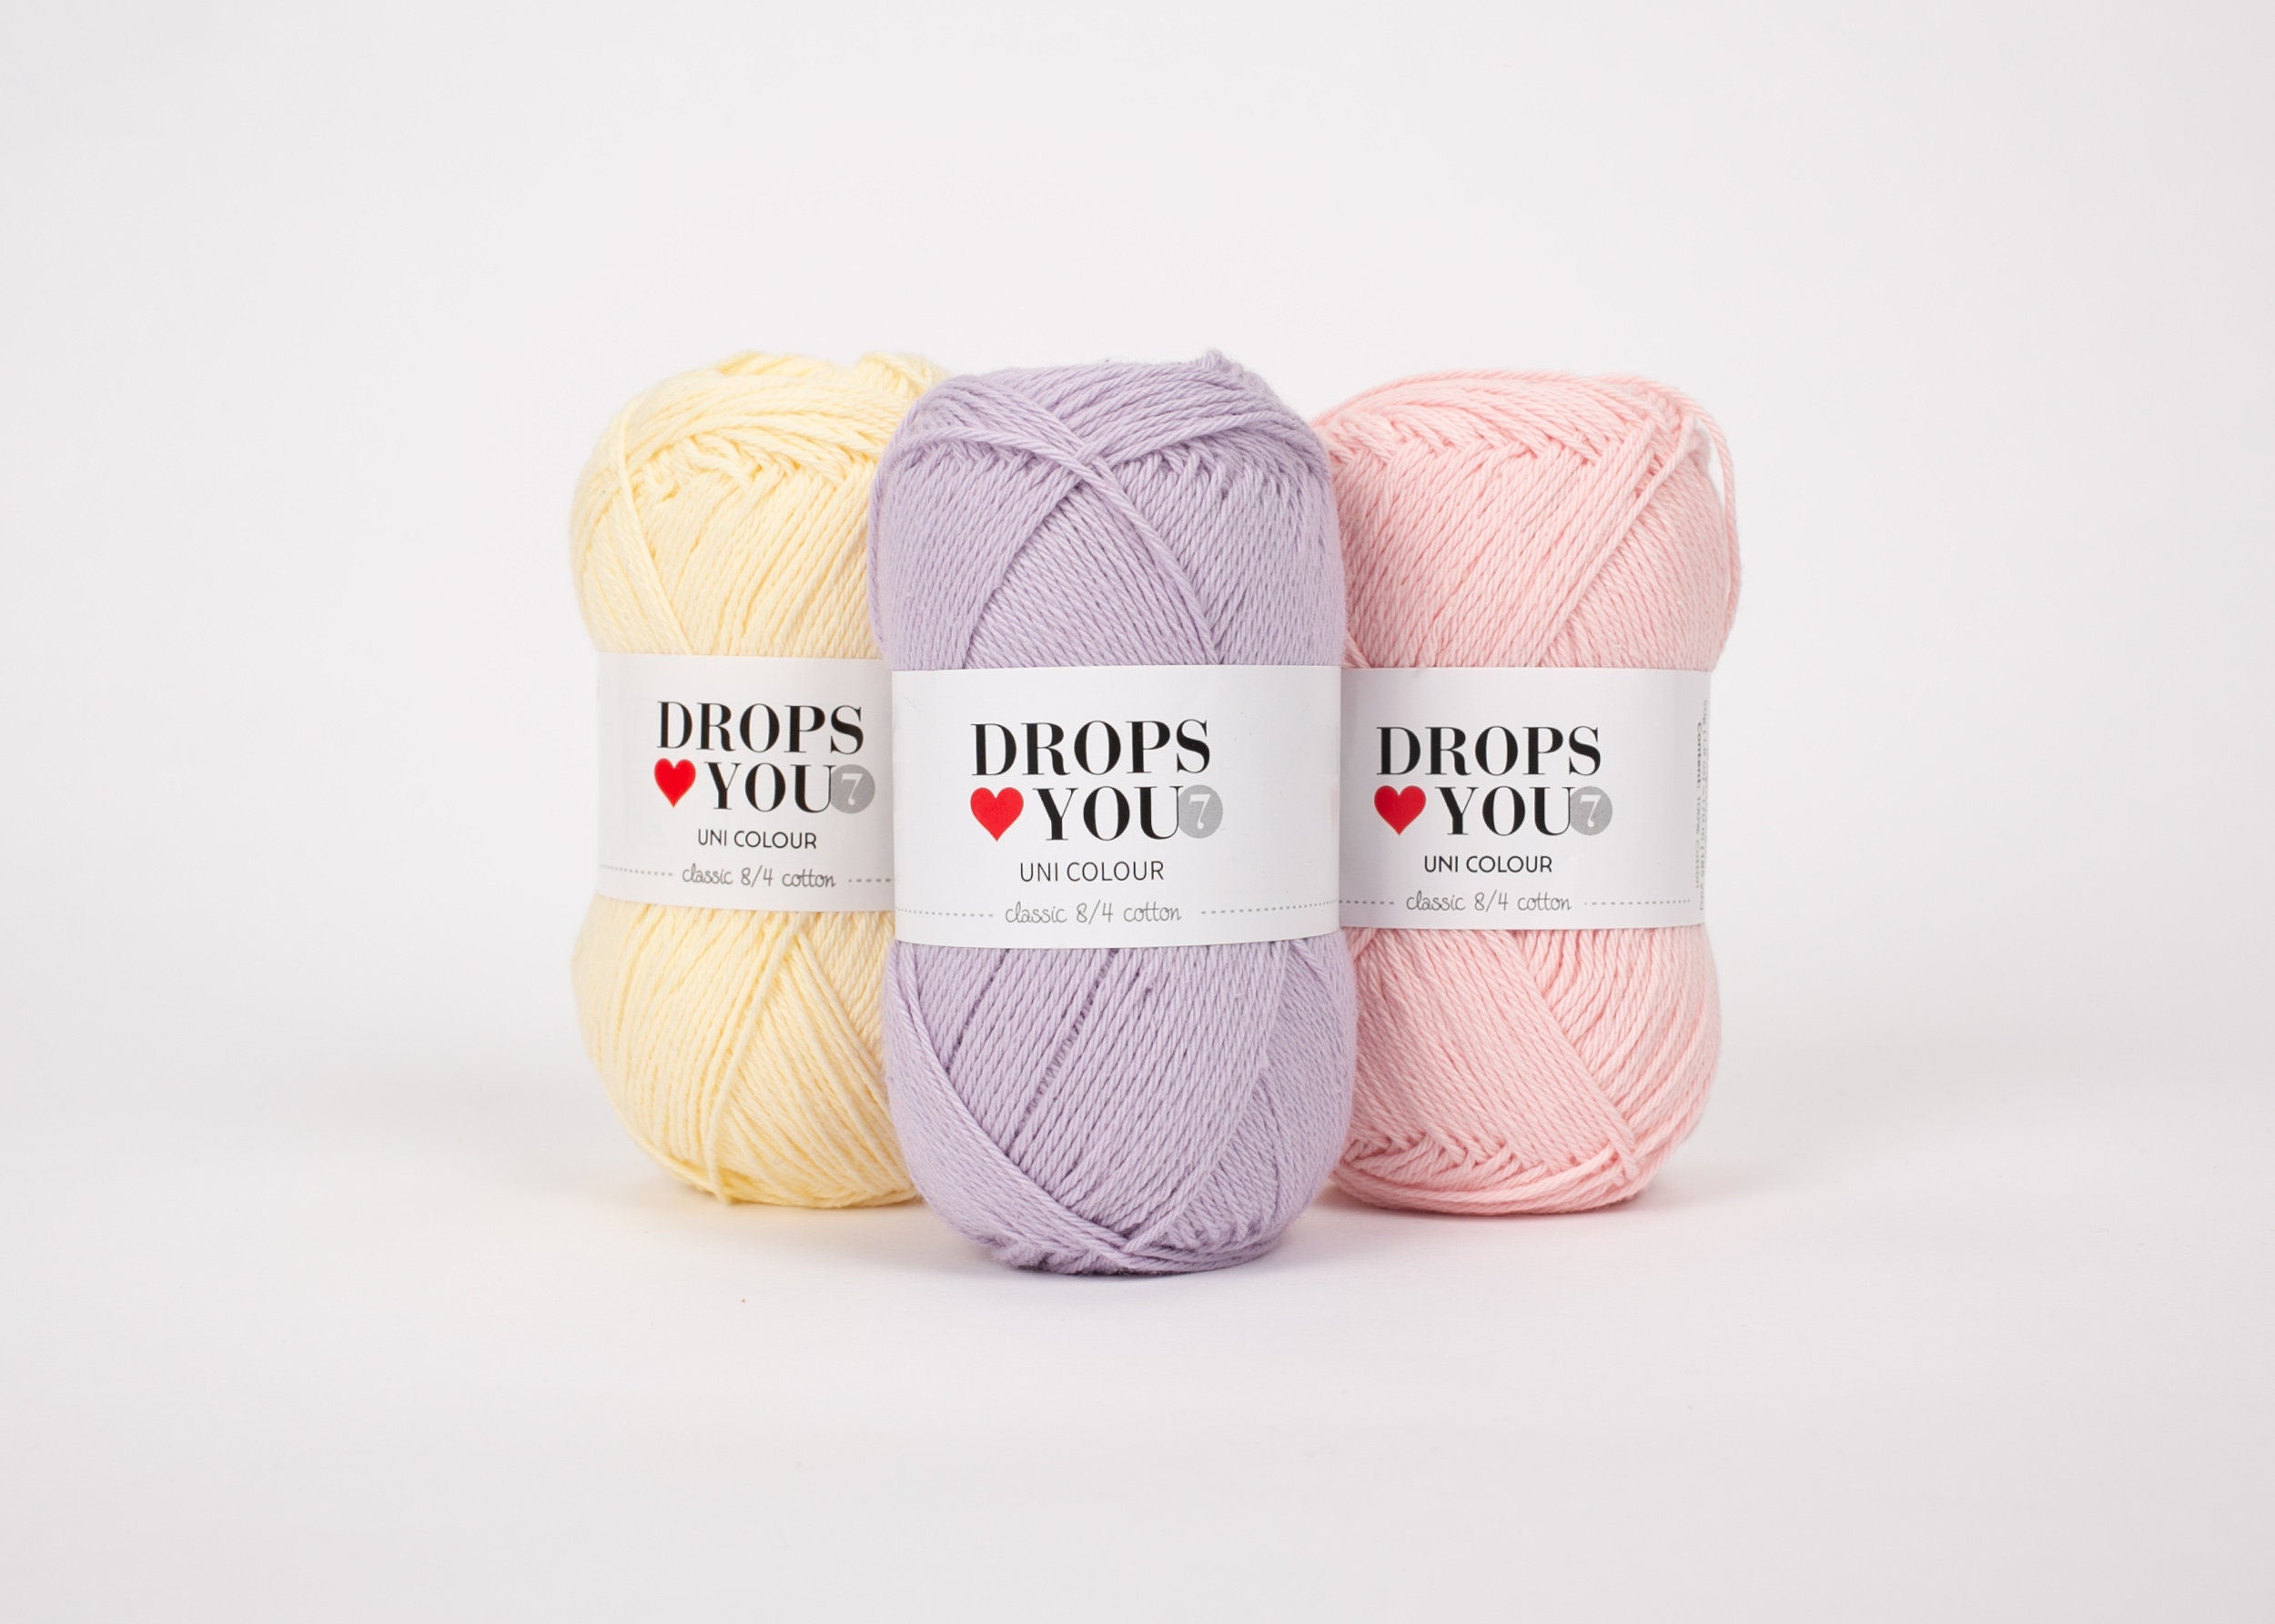 Happy Cotton (45g) (94 colors) – Yarn-a